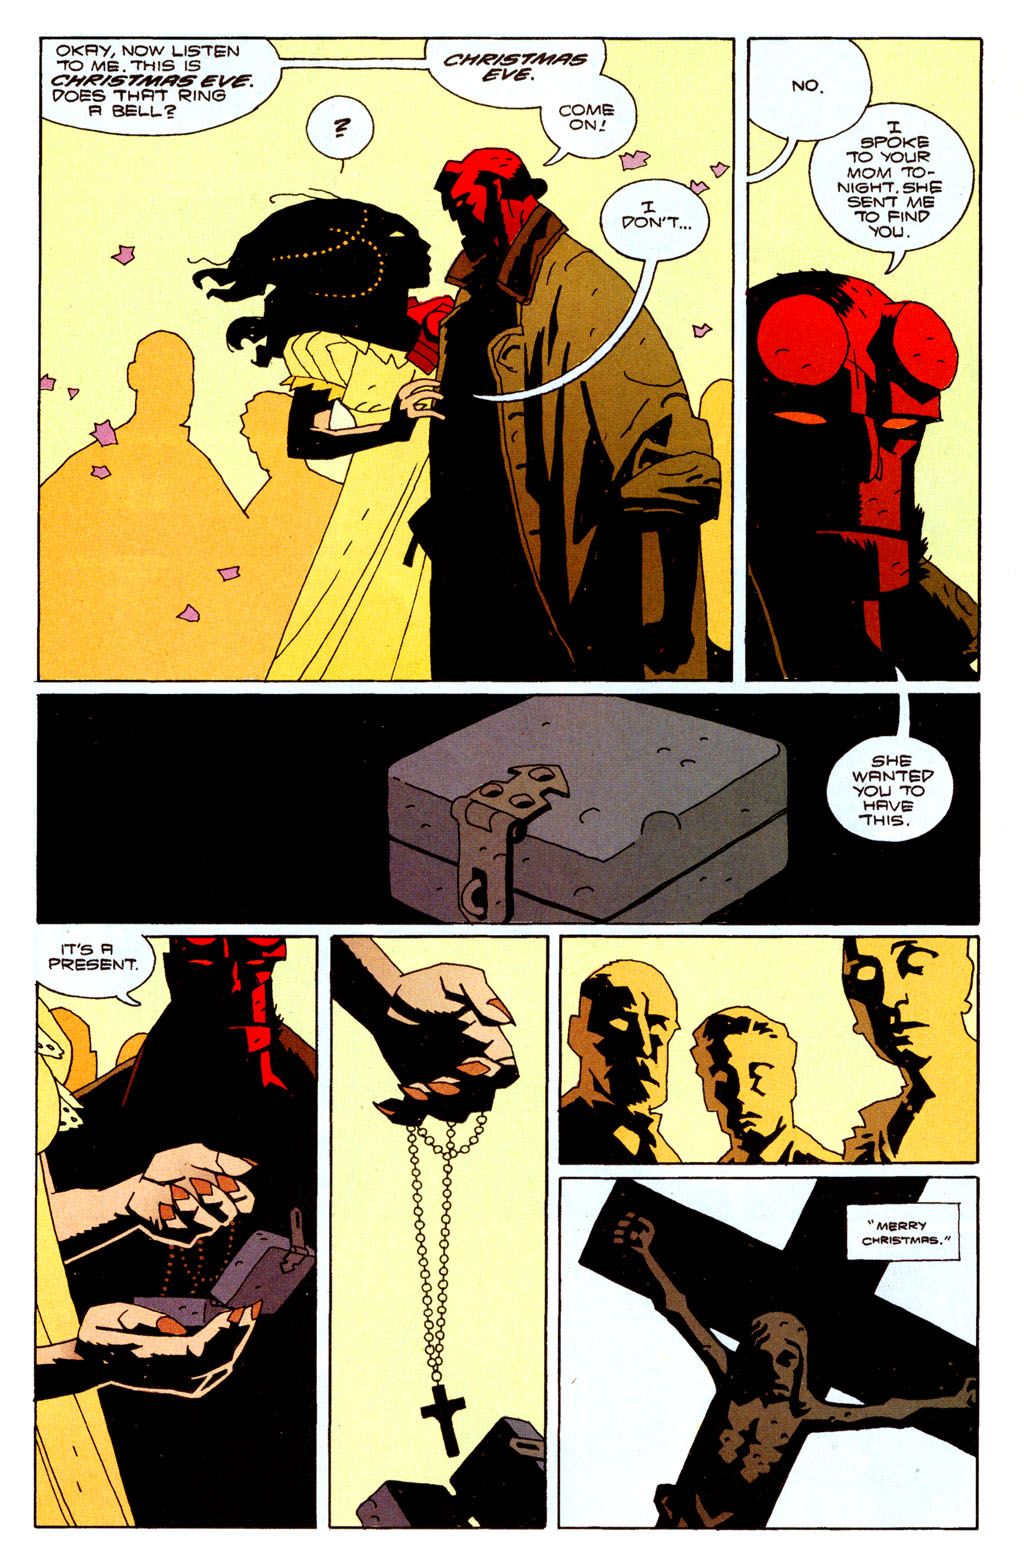 Hellboy tries to save a soul